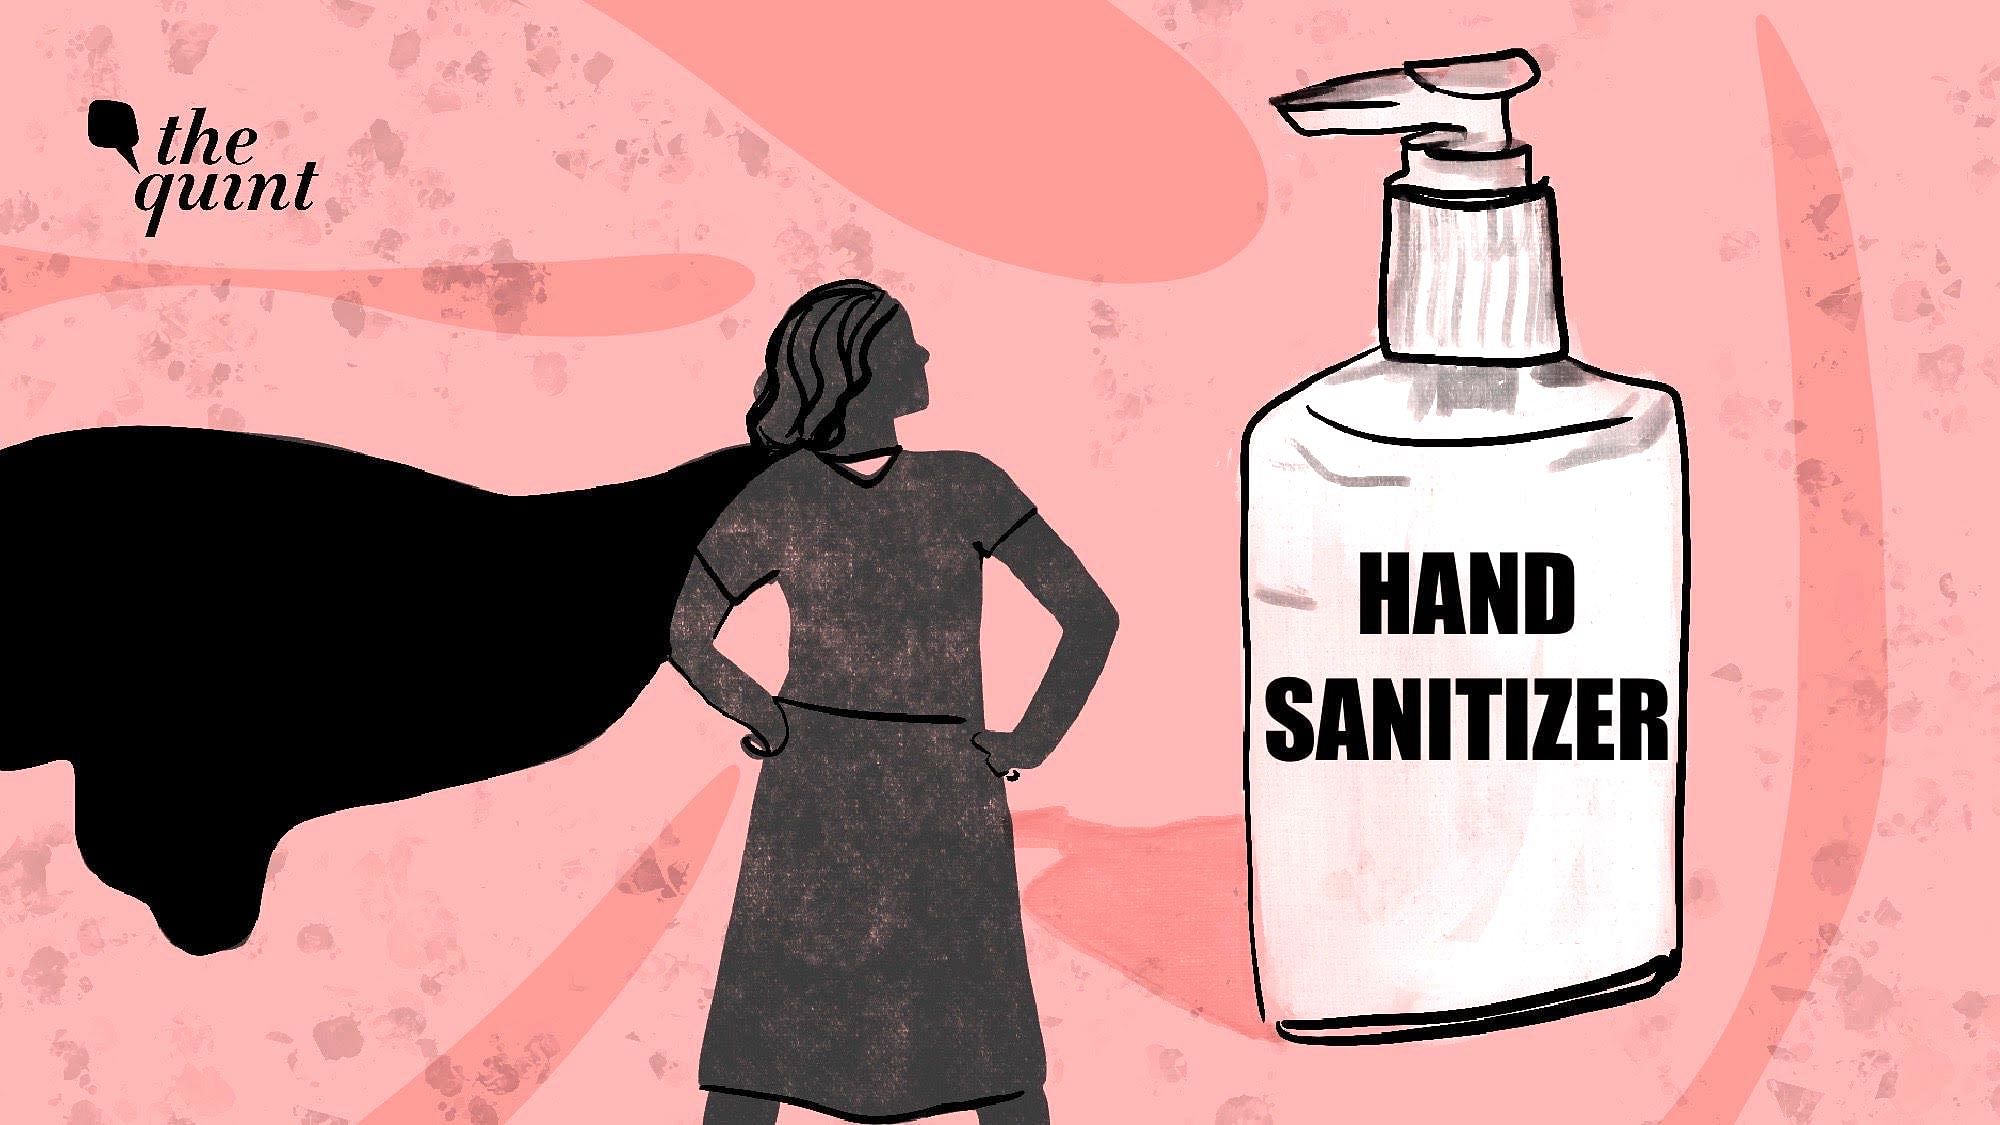 Lupe Hernandez was a nursing student in California’s Bakersfield in 1966, when idea of hand sanitizer struck her.